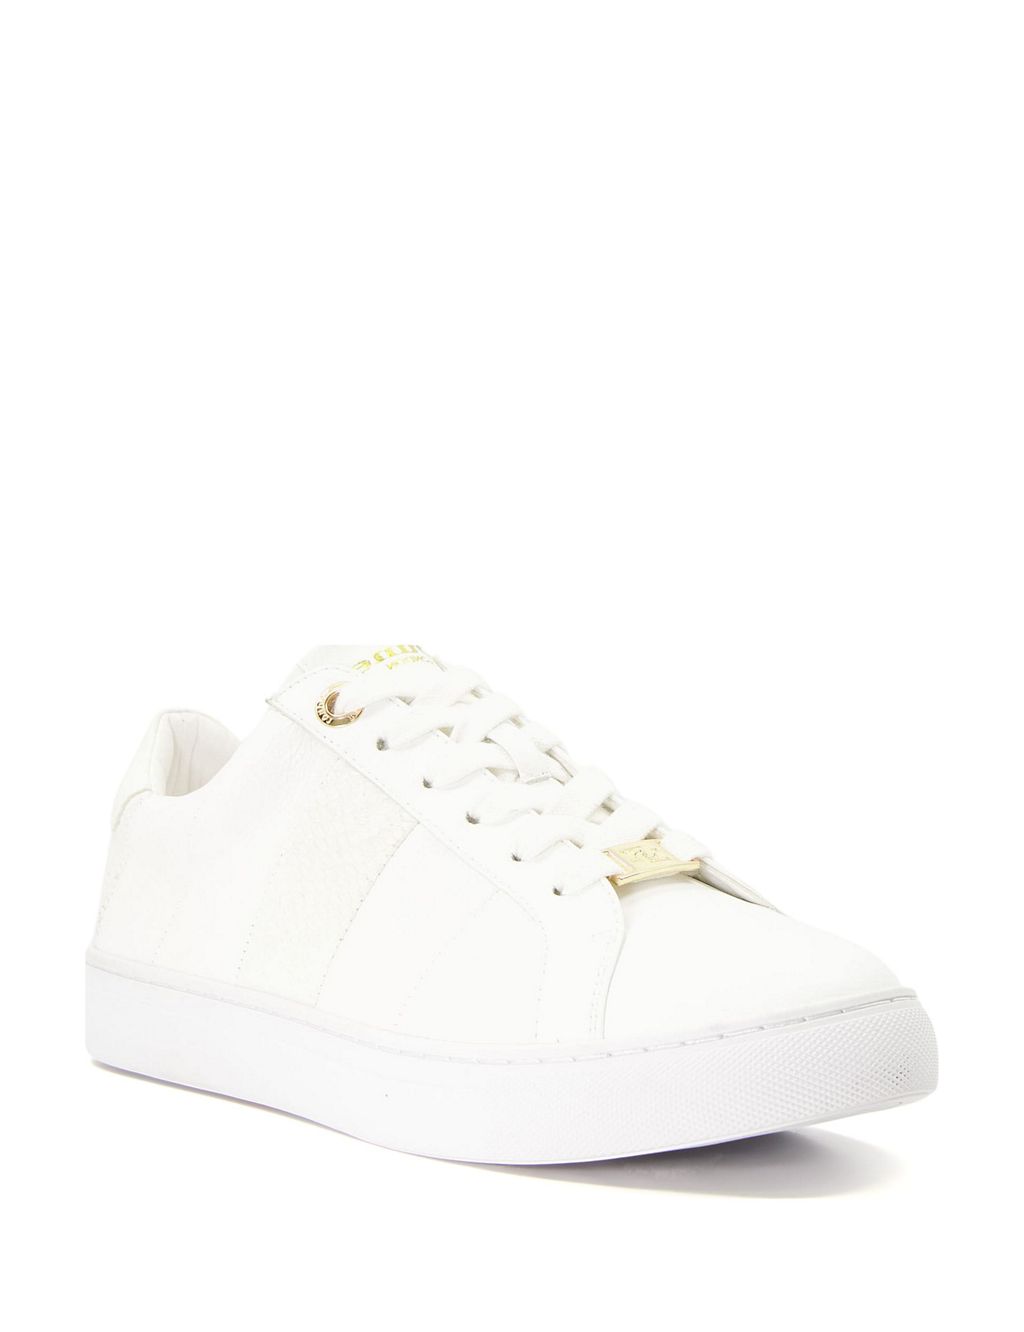 Lace Up Stripe Trainers | Dune London | M&S